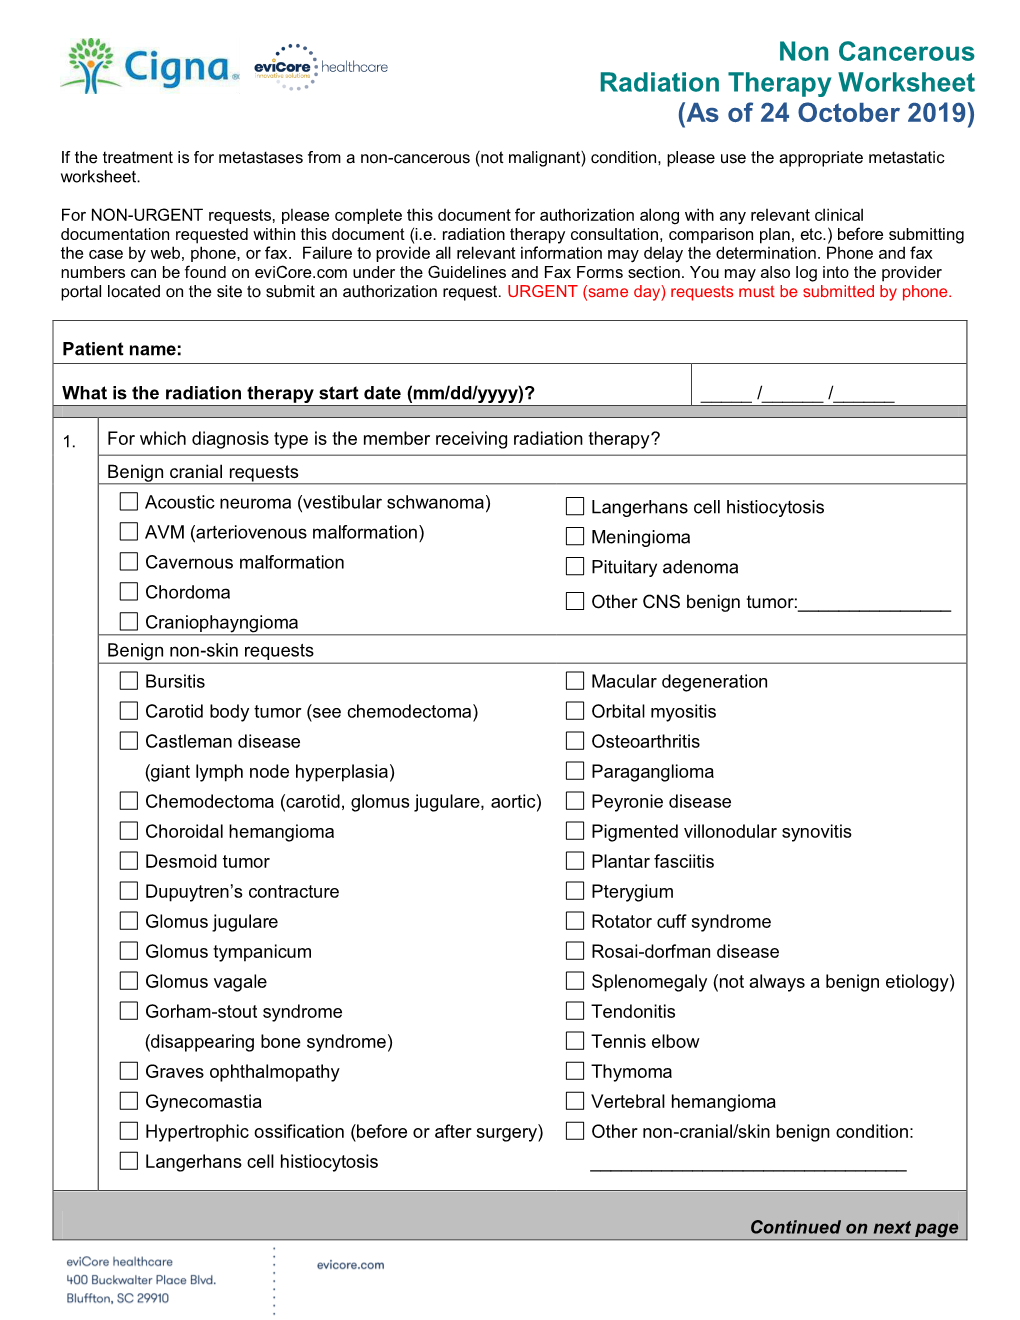 Non Cancerous Radiation Therapy Worksheet (As of 24 October 2019)